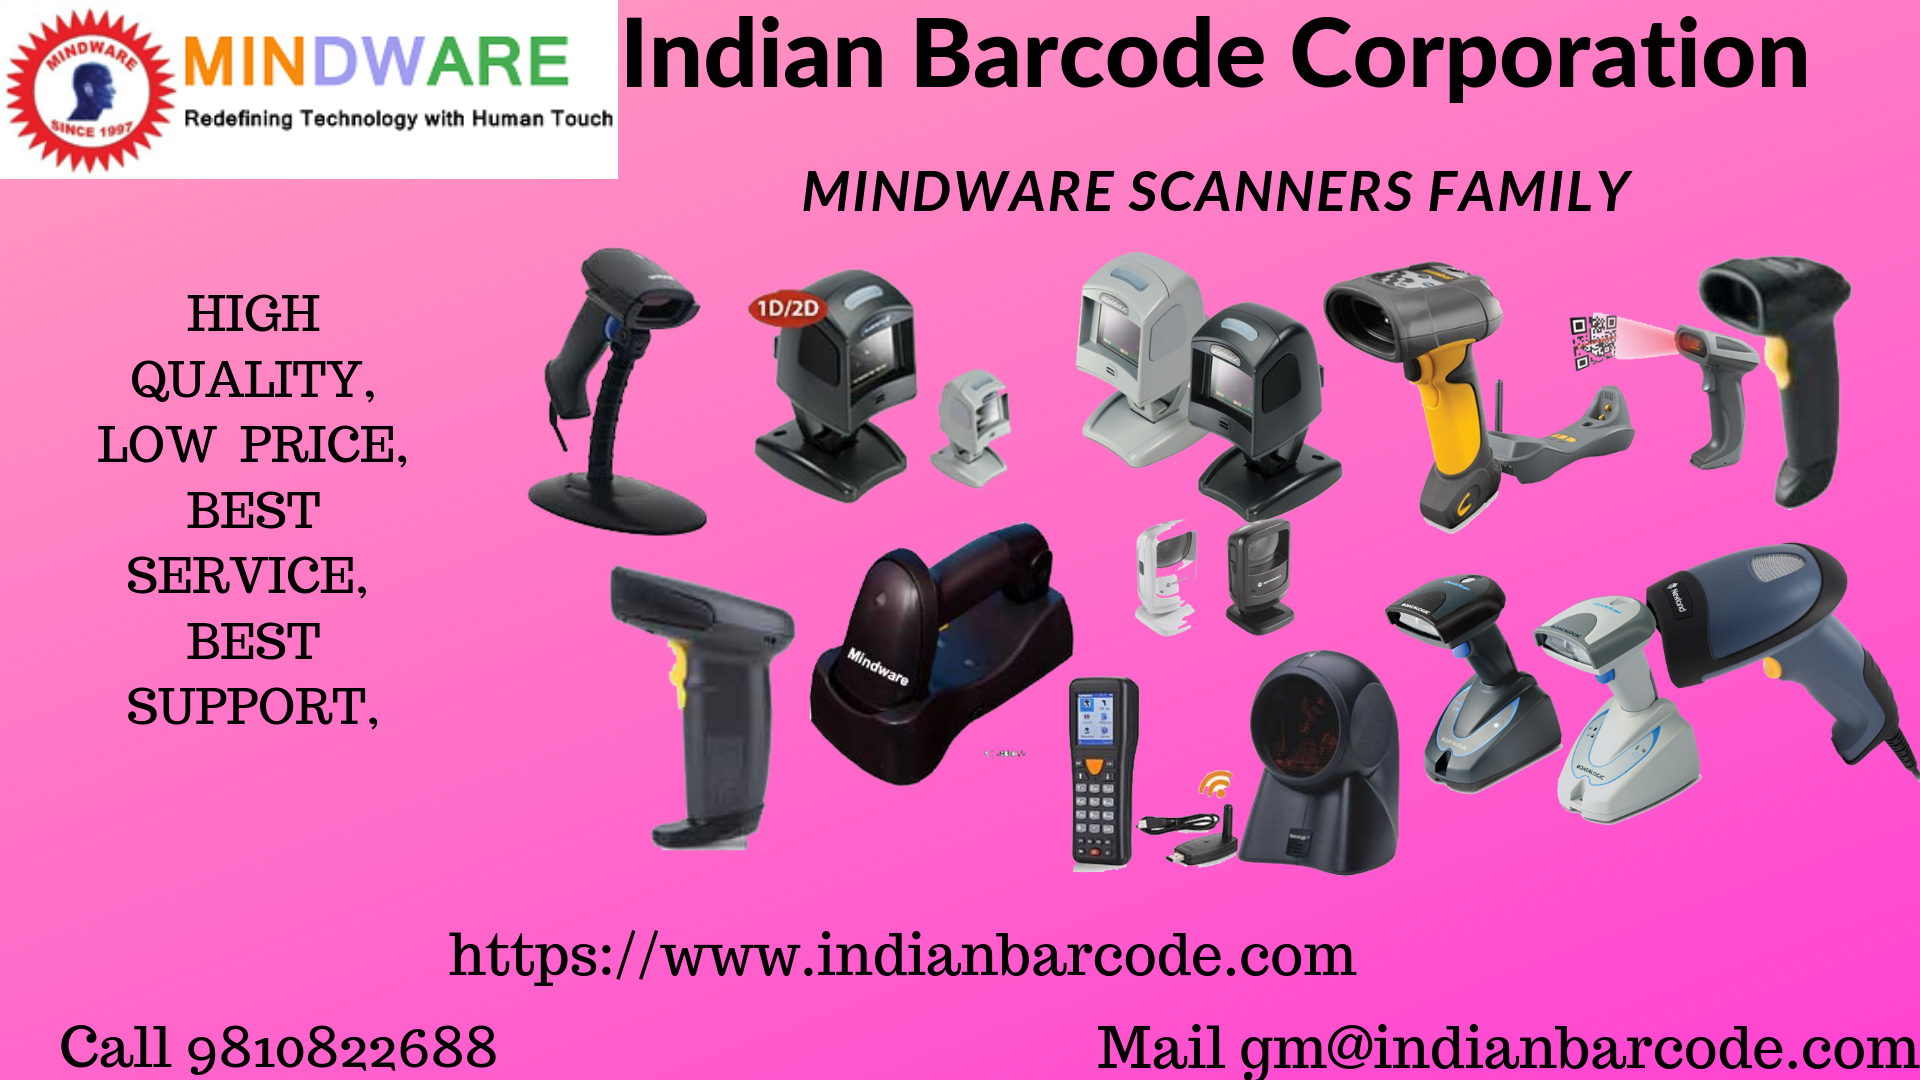 49111566645579mindware-scanners-banners.png